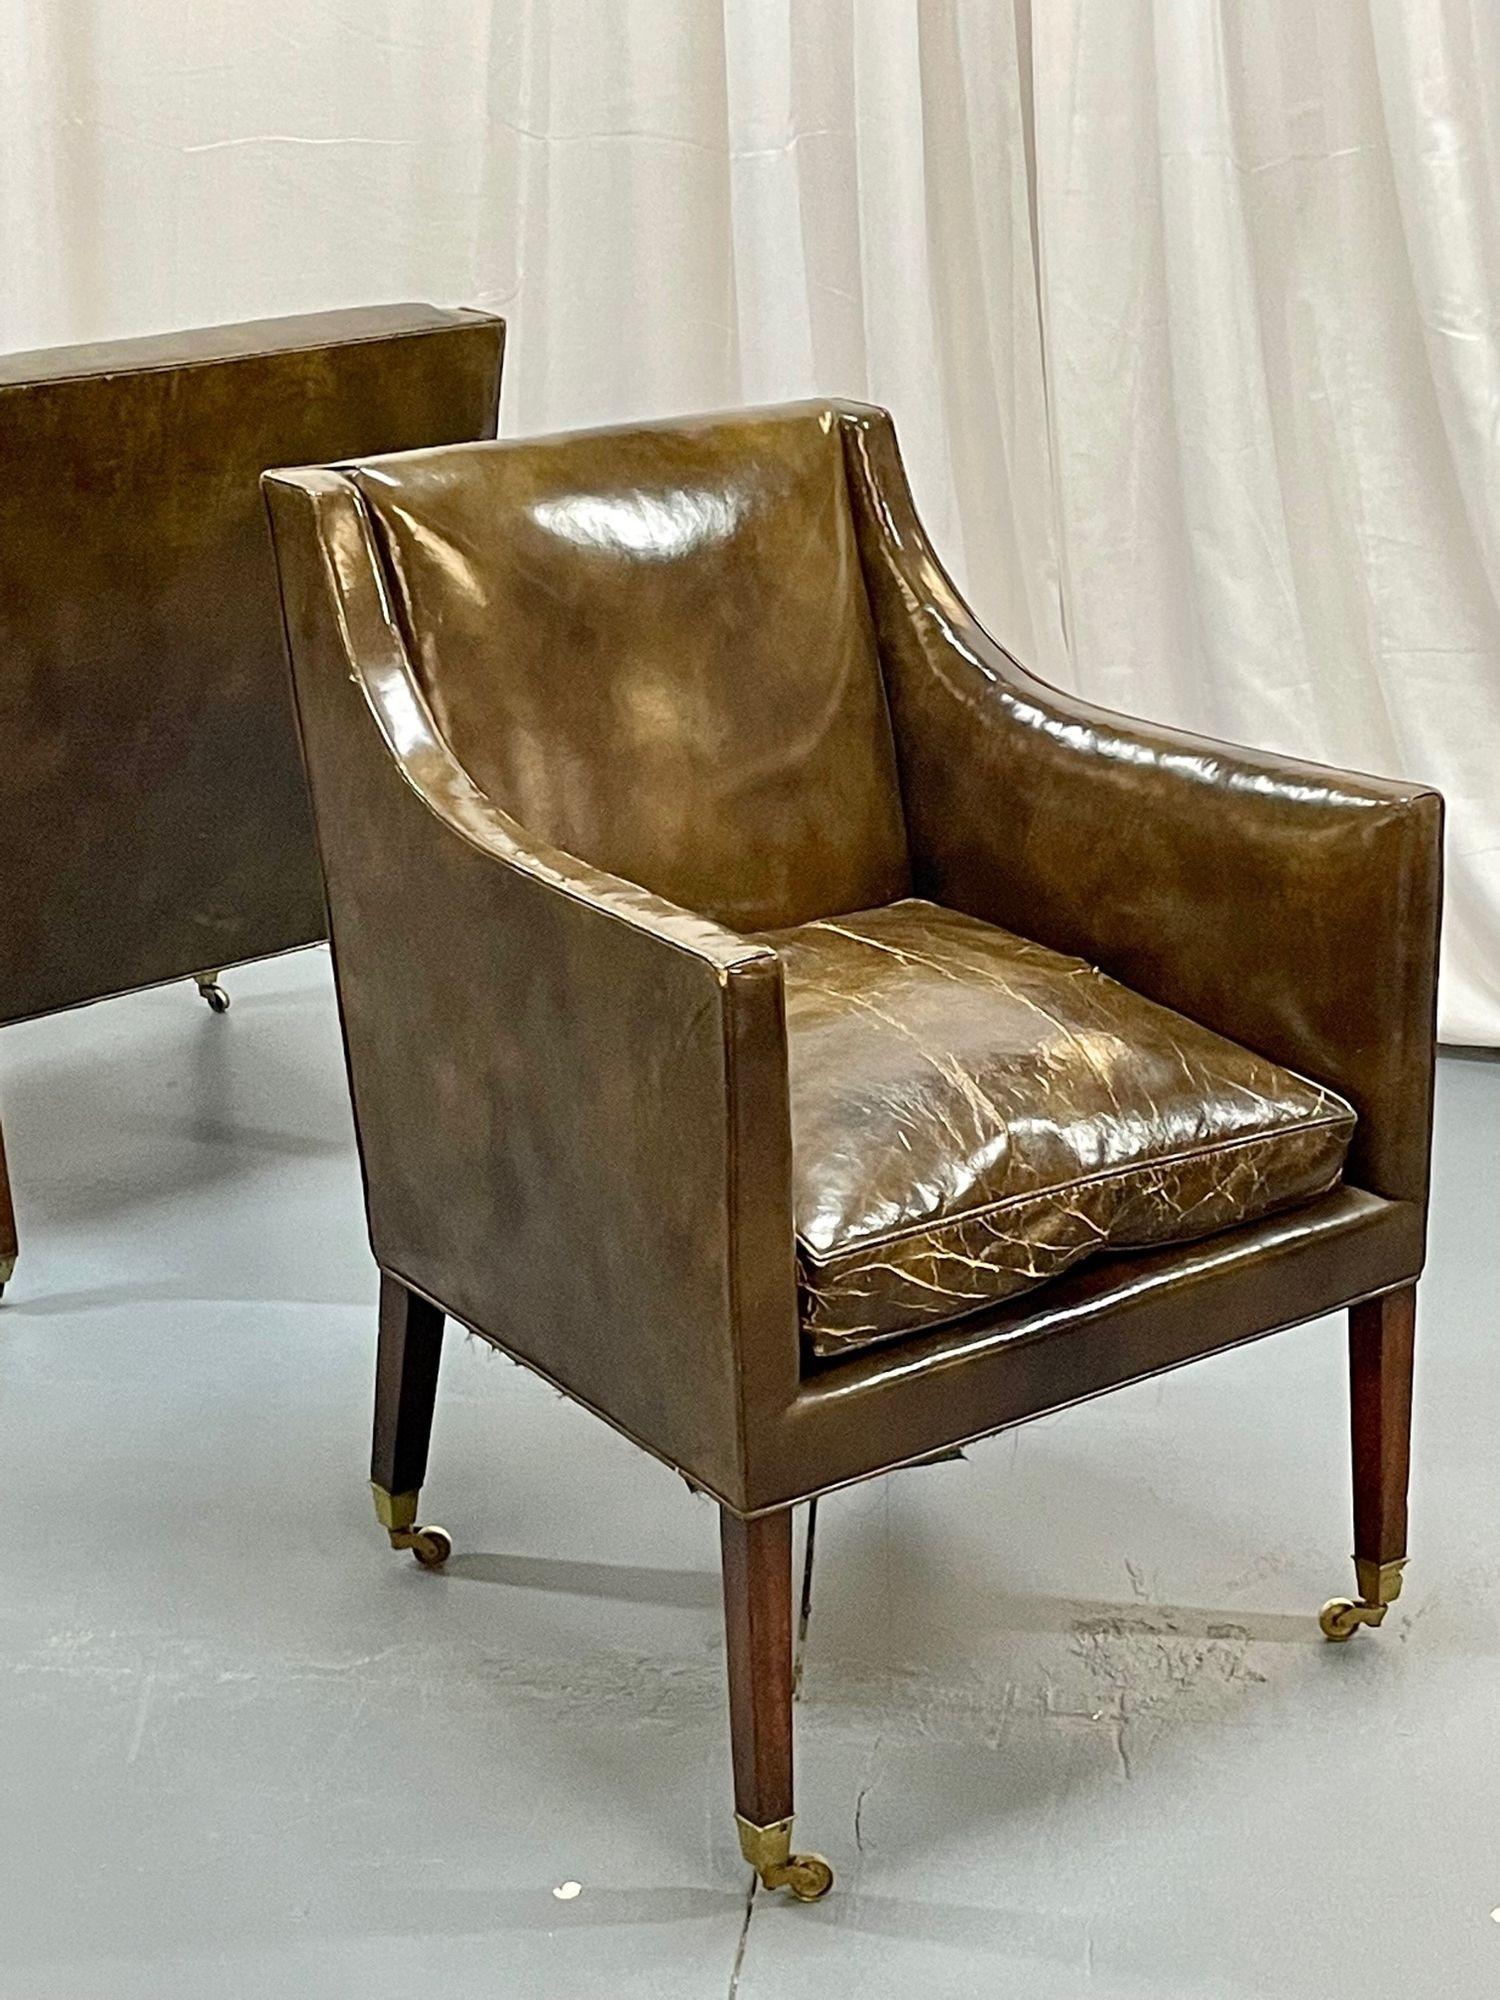 Pair of Patinated Regency Style Leather Upholstered Armchairs

Fantastic patina on this pair of regency library armchairs which still maintain their original leather upholstery. The leather seat cushions are removable. Each chair sits on four legs